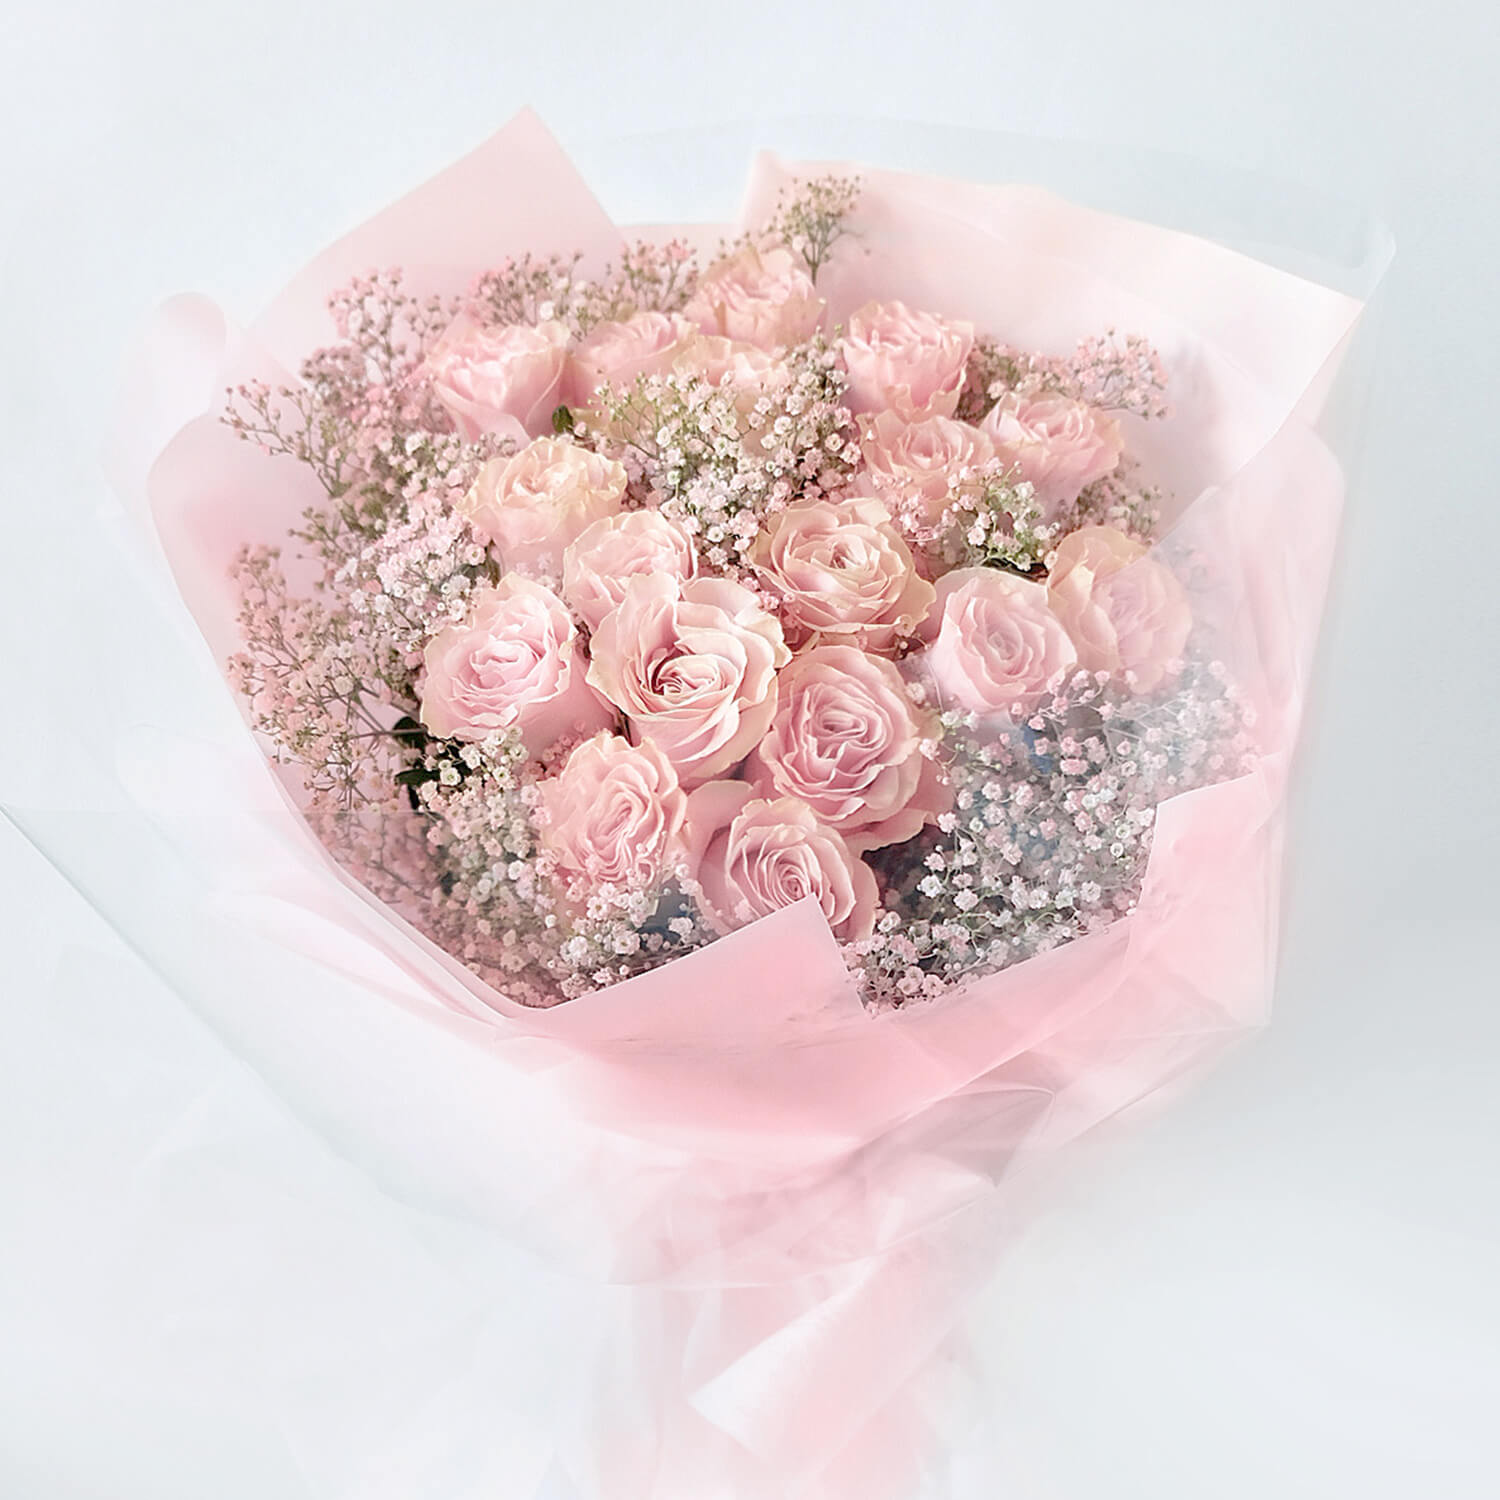 A dozen Light pink wrapped roses  - light pink roses with baby's breath .